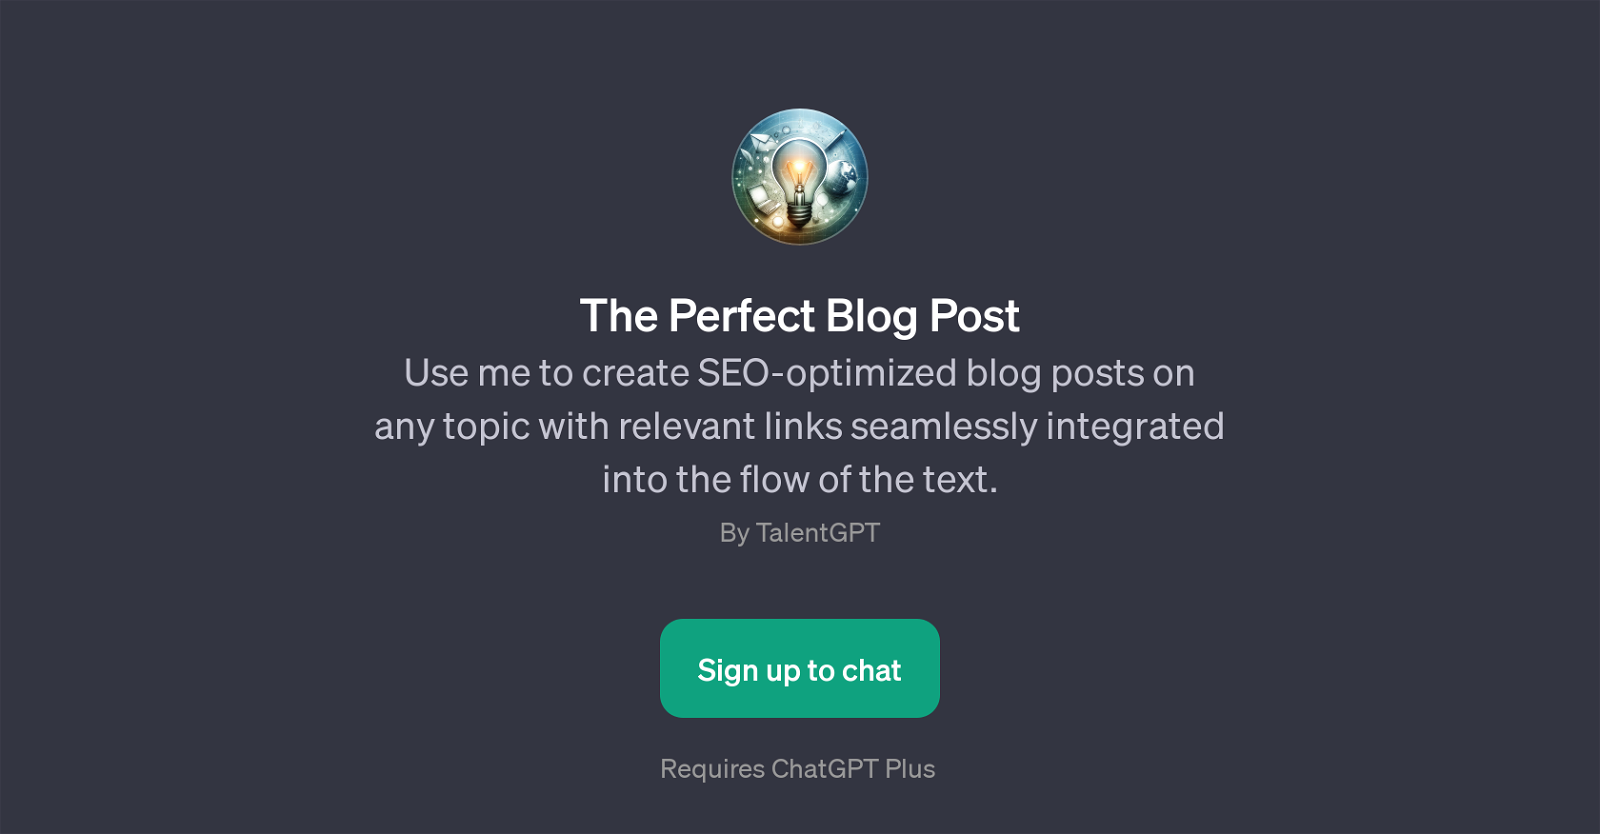 The Perfect Blog Post website